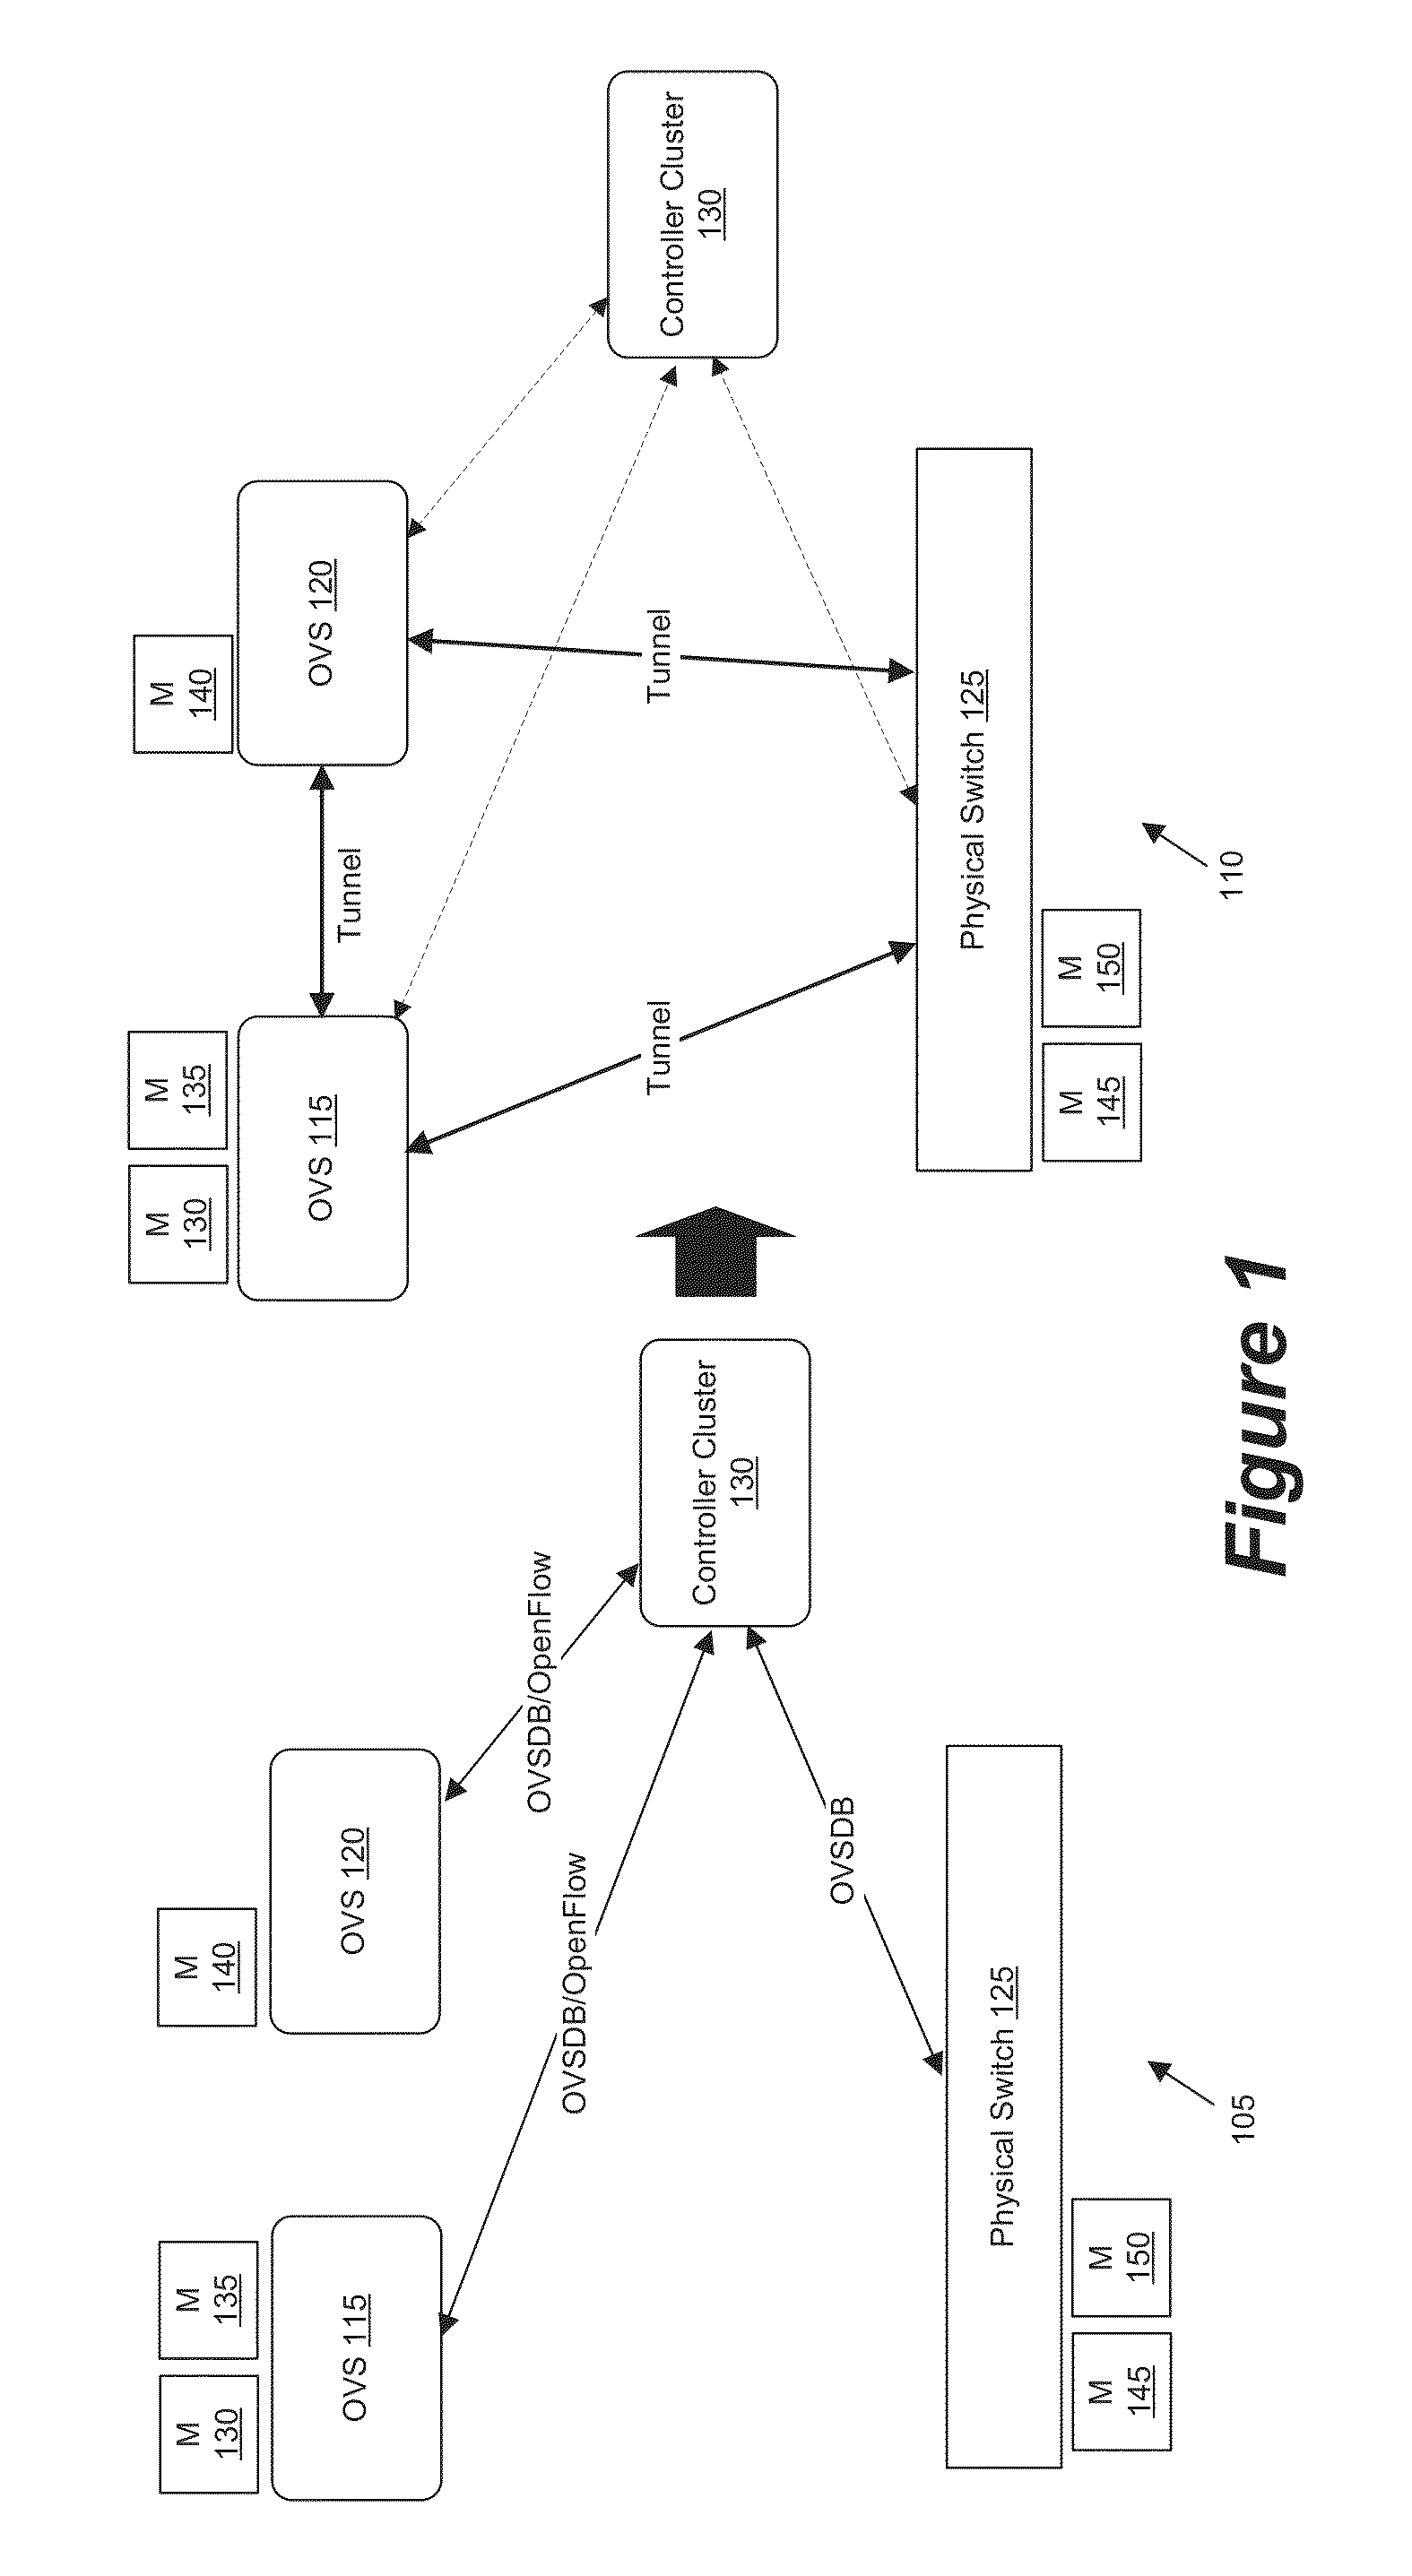 Managing software and hardware forwarding elements to define virtual networks